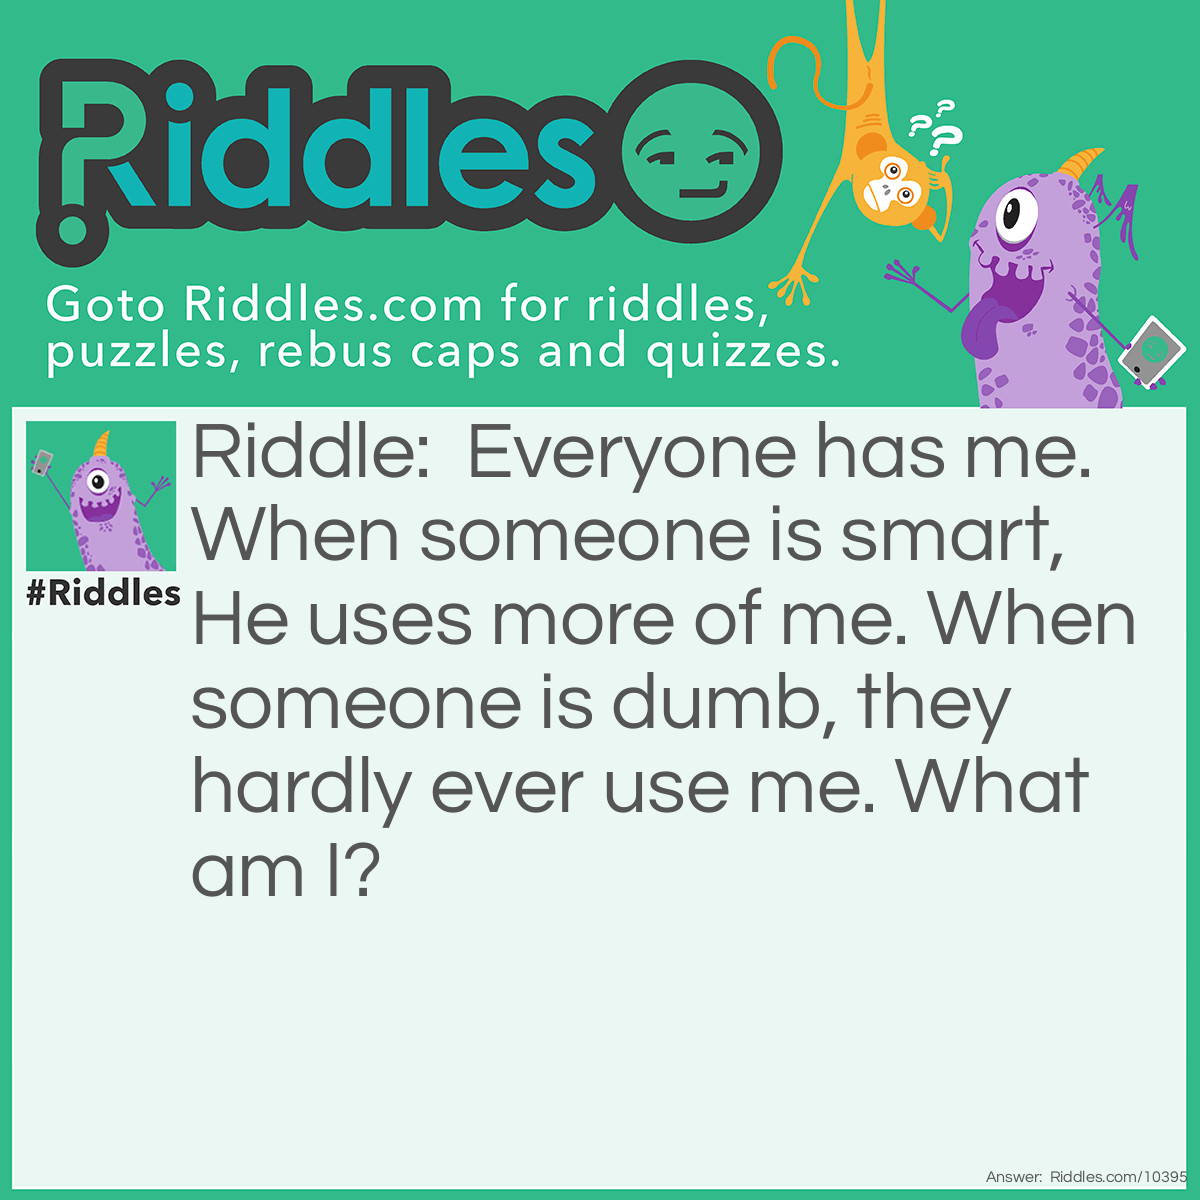 Riddle: Everyone has me. When someone is smart, He uses more of me. When someone is dumb, they hardly ever use me. What am I? Answer: IQ!